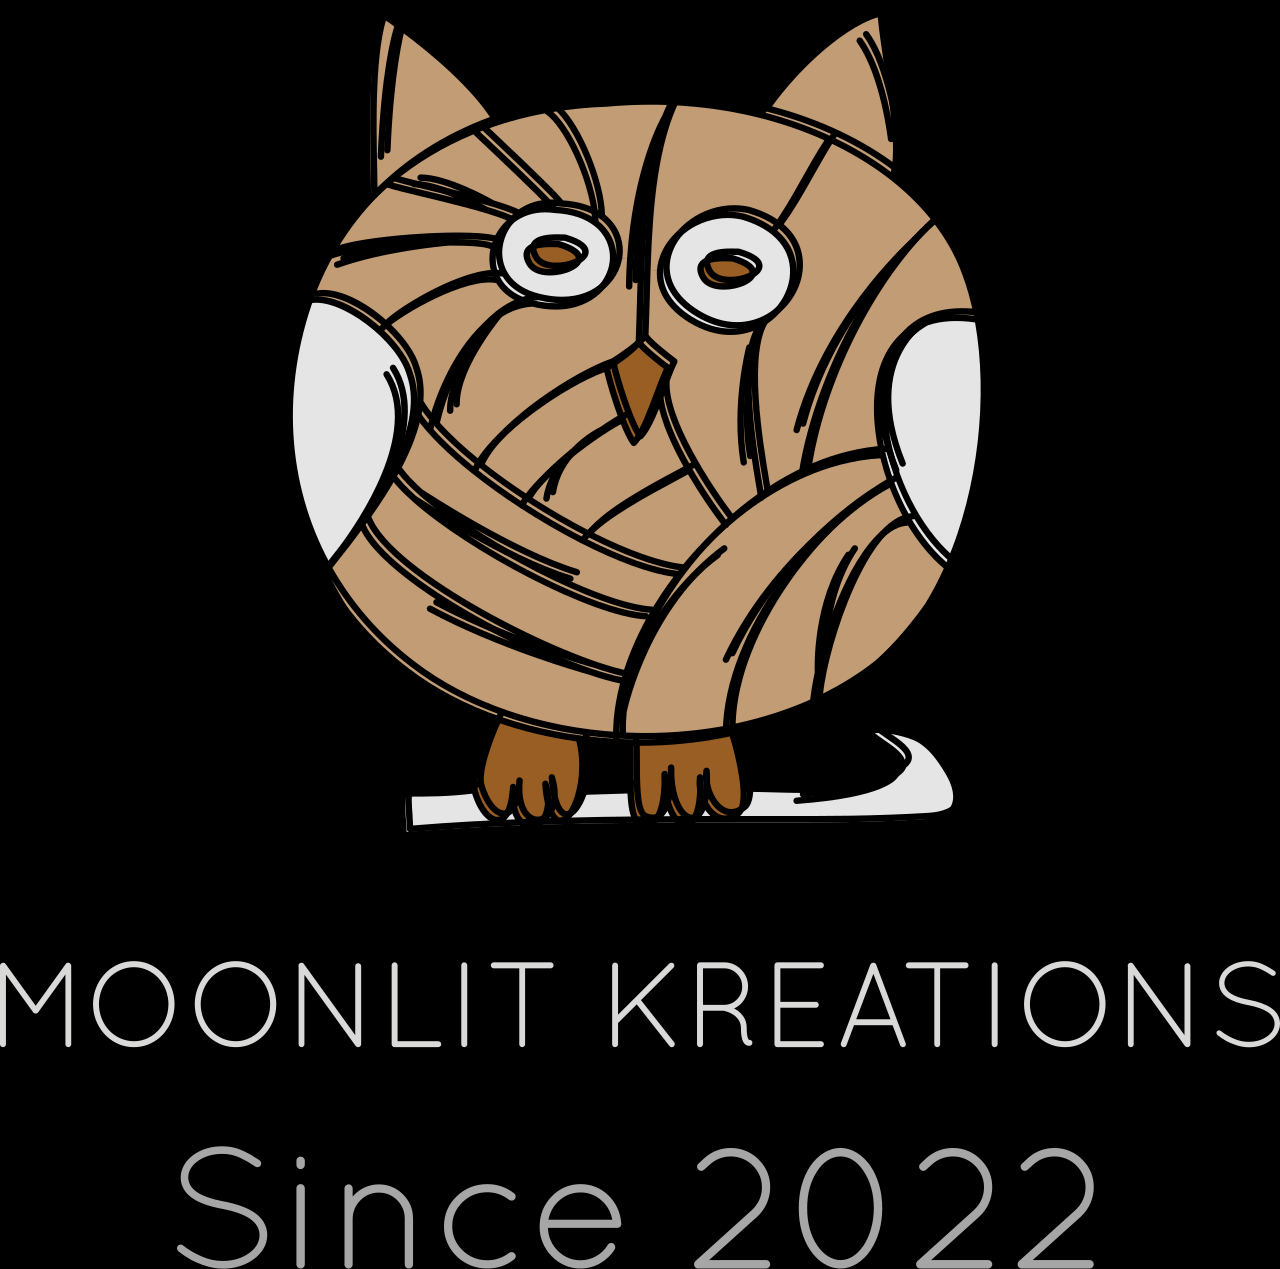 MOONLIT KREATIONS's web page